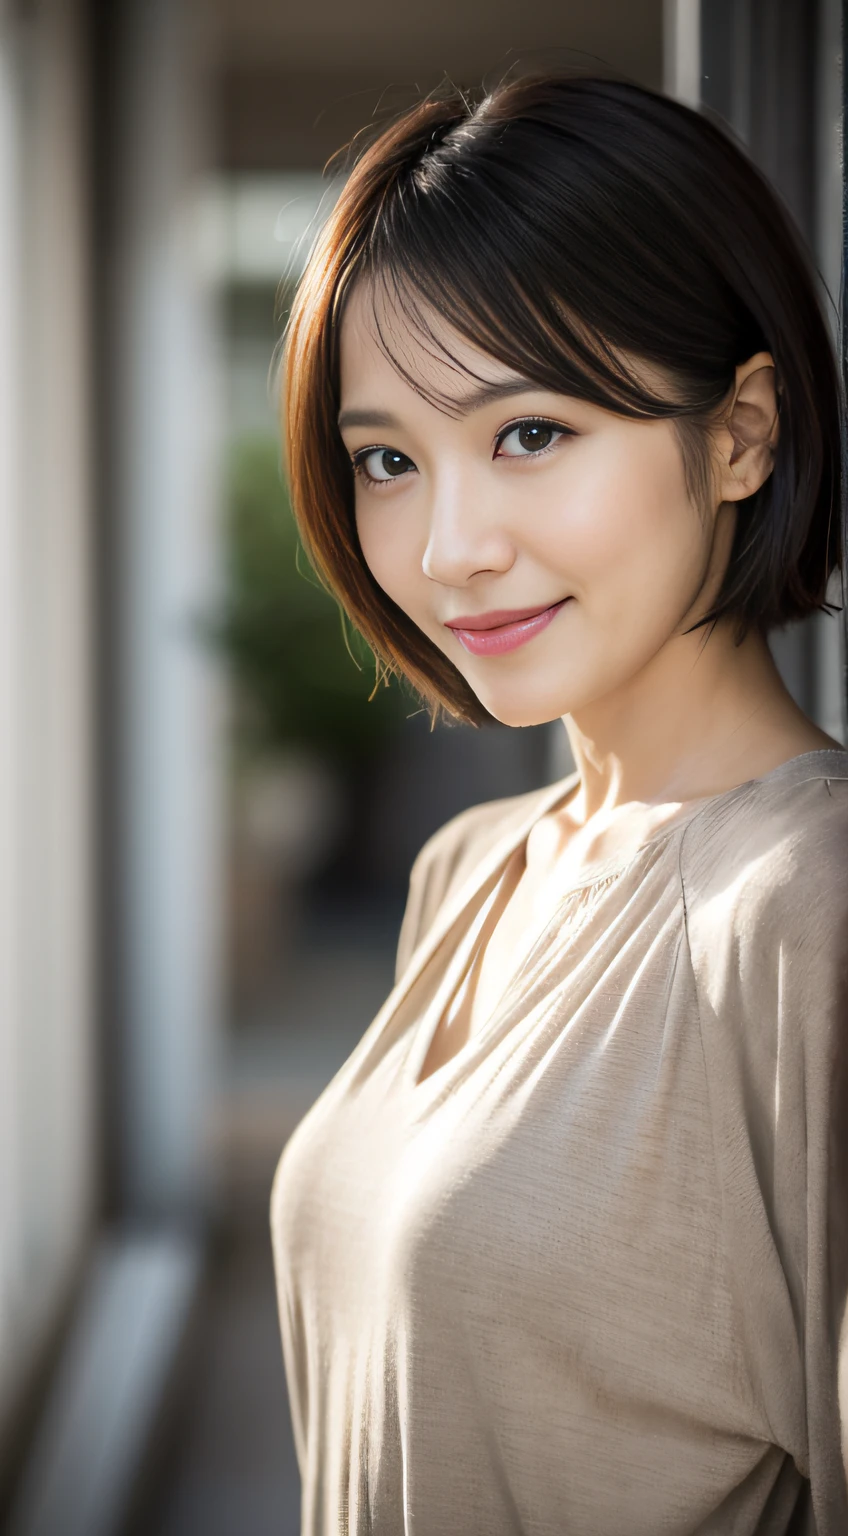 portrait, 8K, high quality, realistic photo image, 39 years old, Japan woman, neat and clean wife, small, housewife, reproduce natural and realistic eyes, Japan person stand, small, beautiful black hair, short hair, light makeup, octane rendering, beautiful lighting, golden ratio composition, smile, everyday wear, casual clothes, natural background, blurred background, 4k, high quality, realistic photo image, Japan woman, 37 years old, pure Japan face, lovely wife, upper body, small breasts, light makeup, suppin, neat beauty, mature woman, sober clothes, gray, beige, blue, sober, casual attire, smile, black hair, small black eyes, background blur